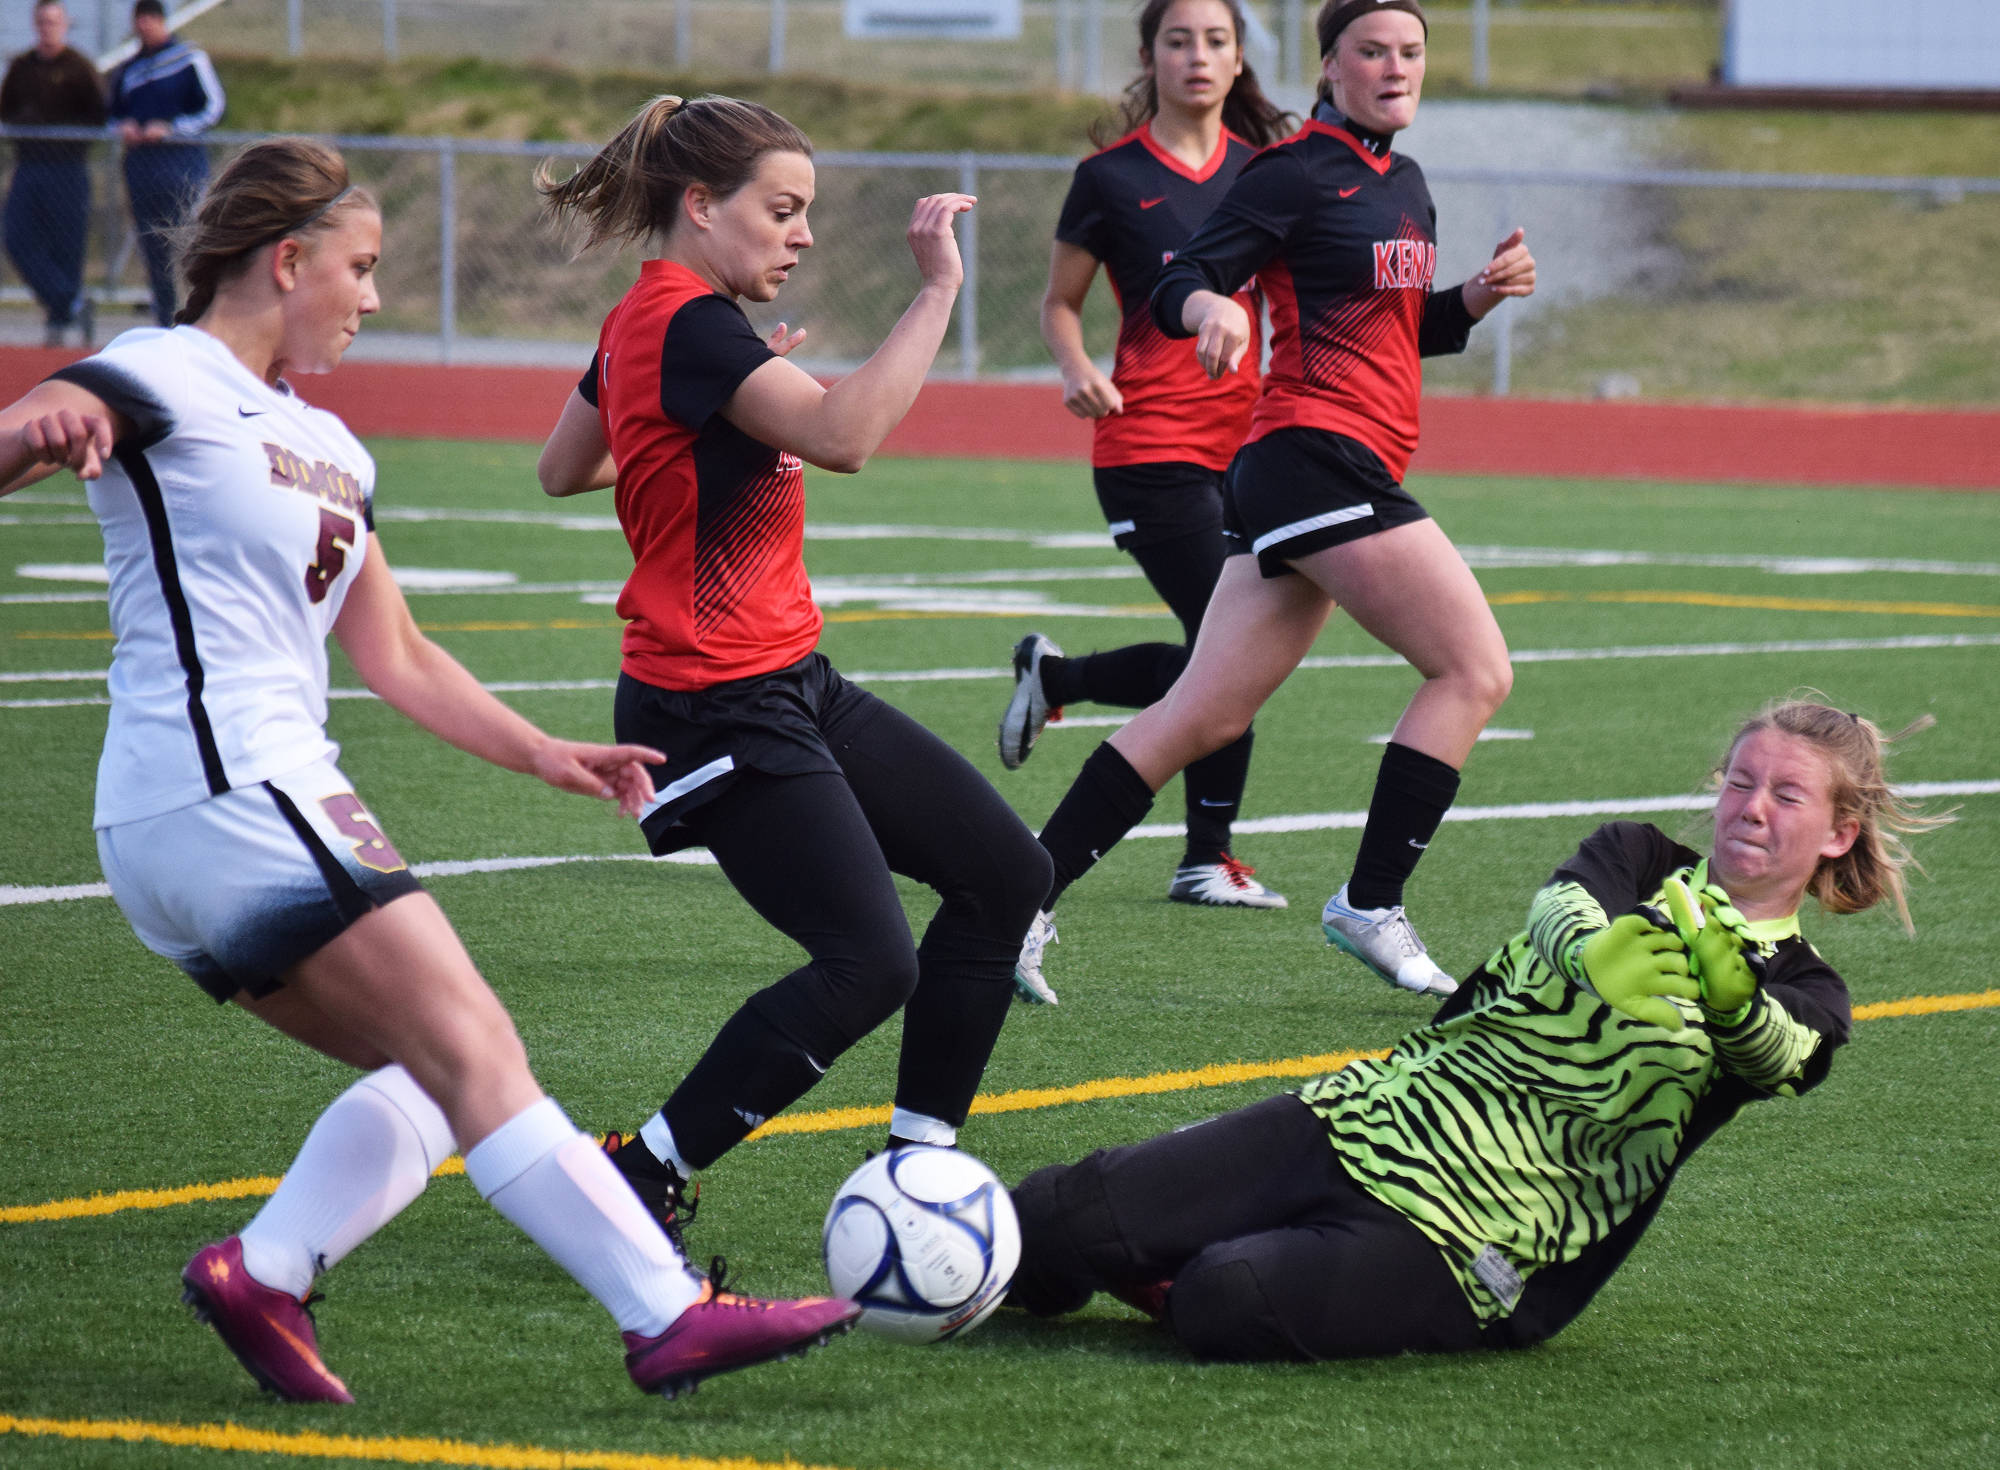 Kenai Central goalkeeper Kailey Hamilton blocks a shot from Dimond’s Kelsey Eagle, Thursday at the girls state soccer tournament at Eagle River High School. (Photo by Joey Klecka/Peninsula Clarion)